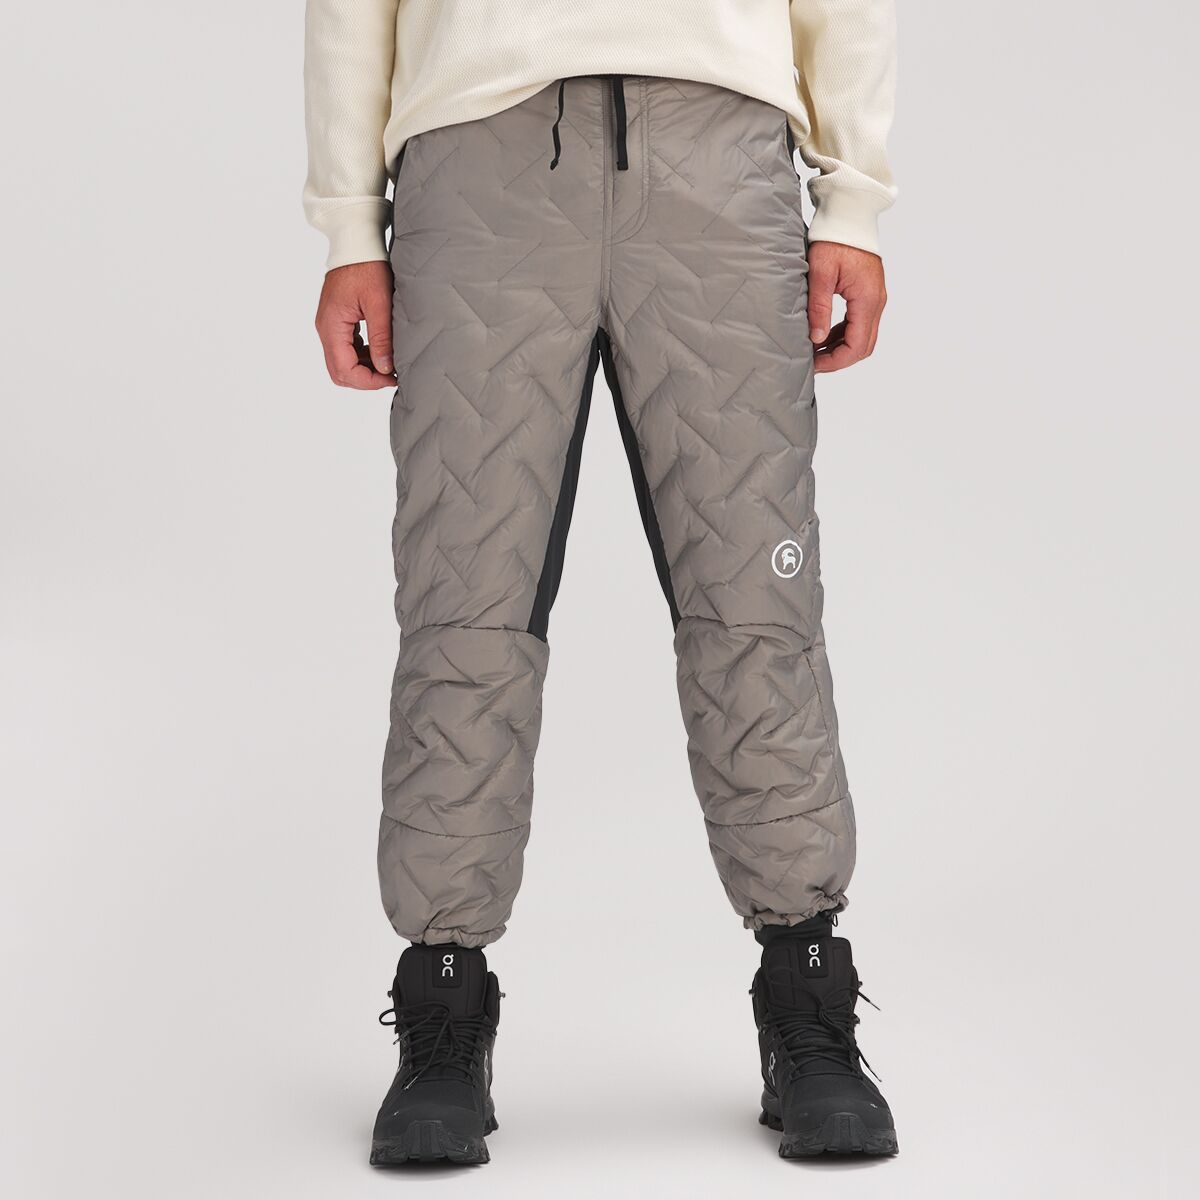 Backcountry Teo Hybrid ALLIED Down Pant - Men's